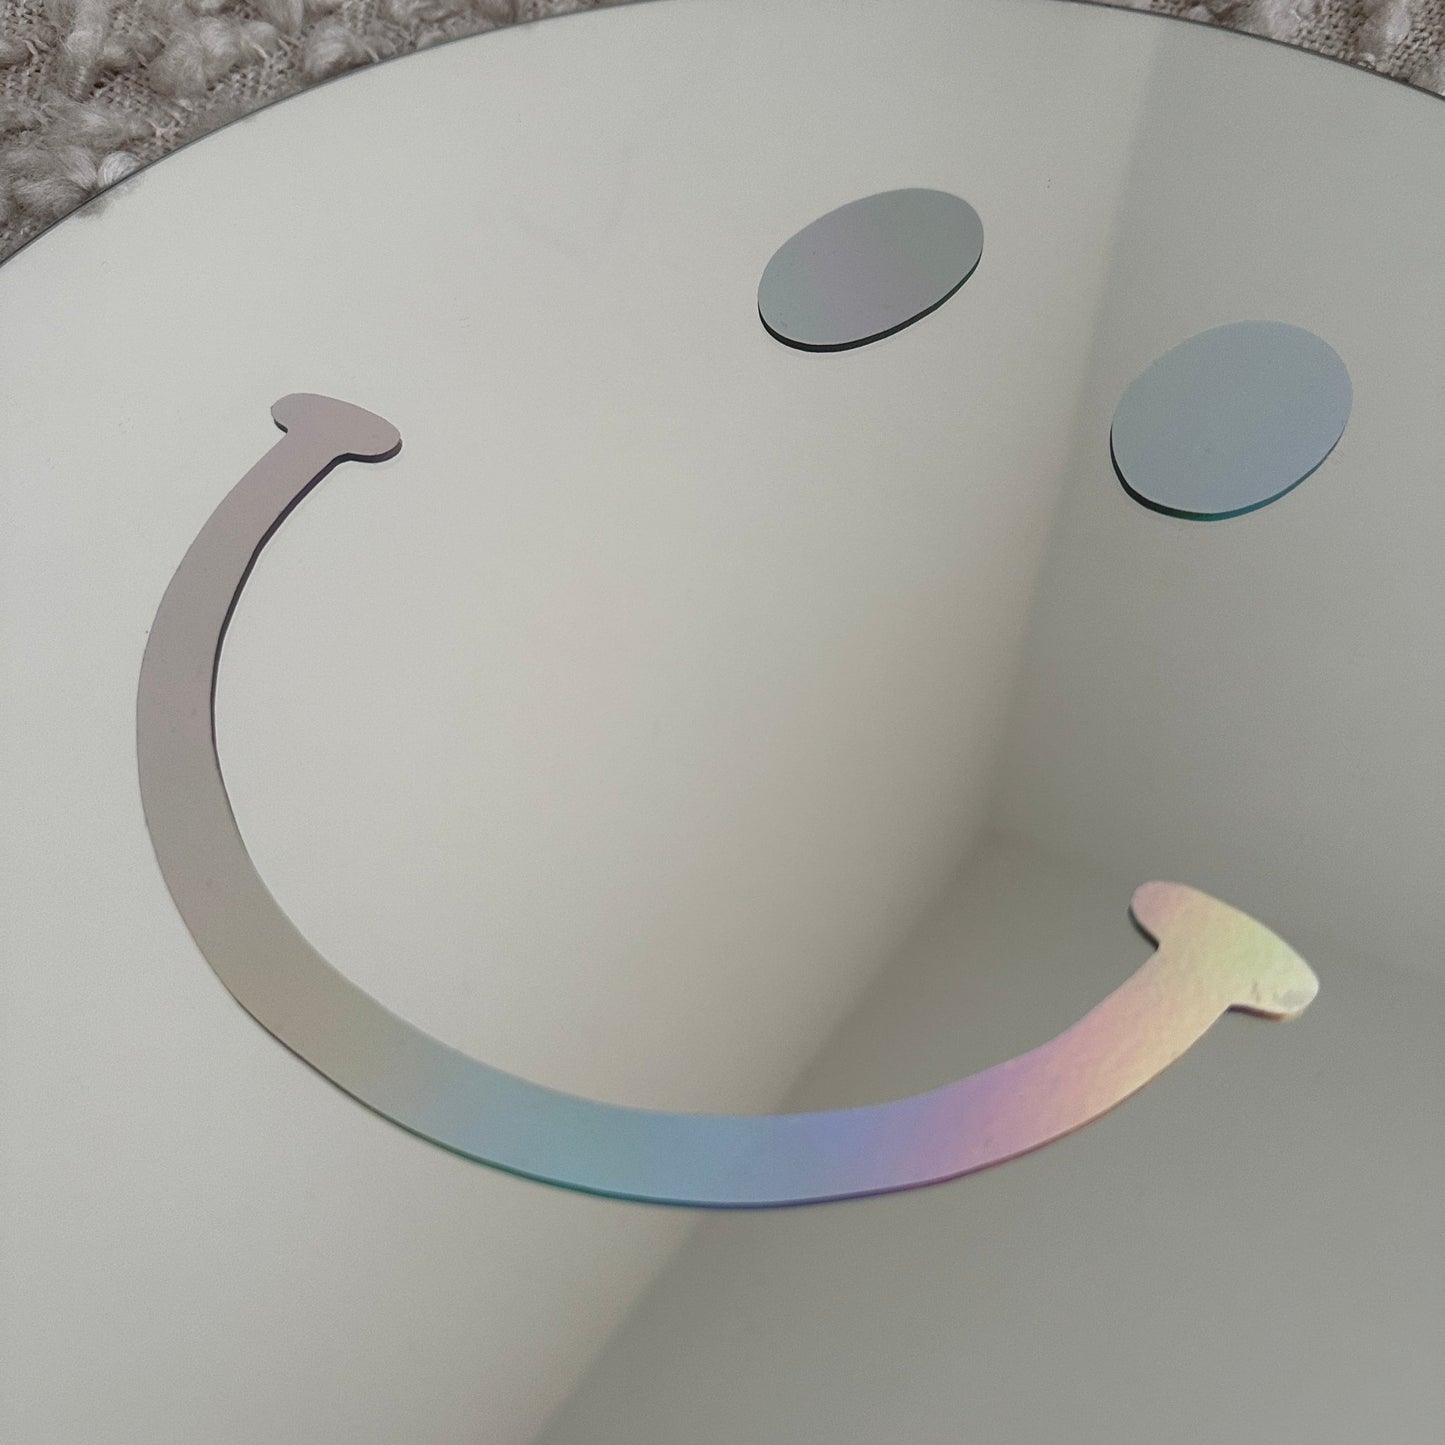 The Big Holographic Smile